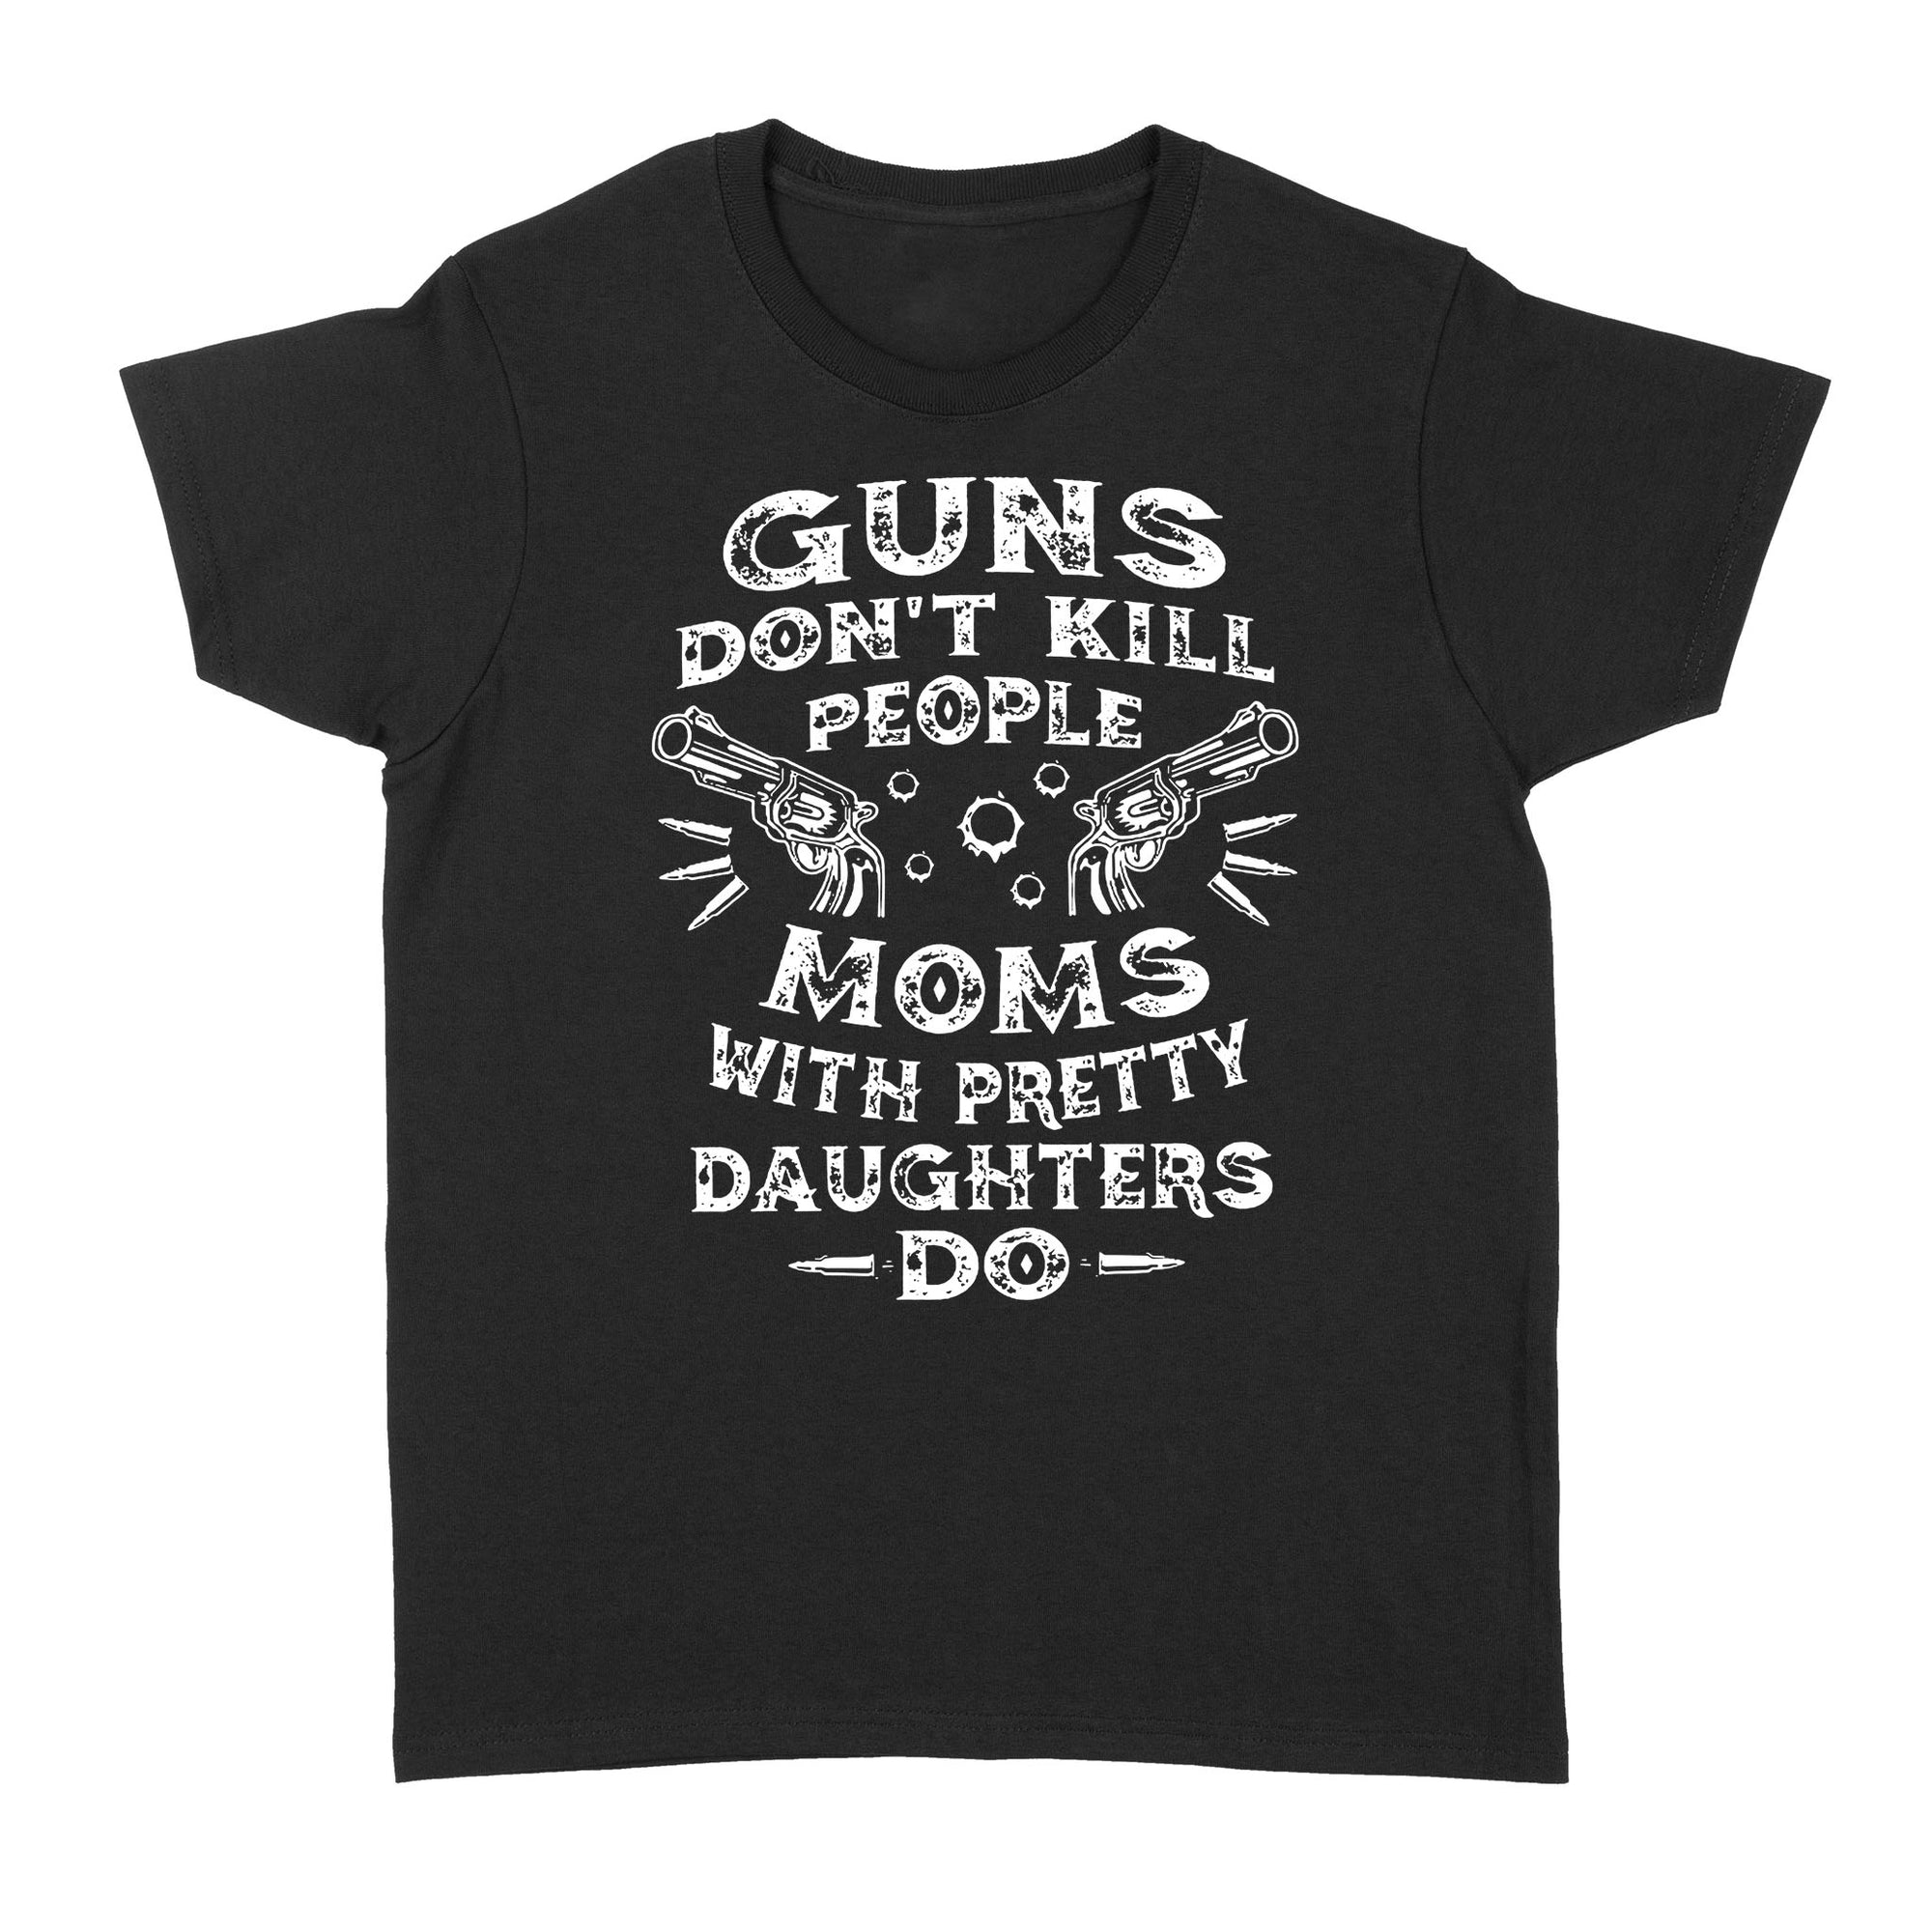 Guns Don t Kill People Moms With Pretty Daughters Do Funny Gift Ideas for Mom Mother Wife - Standard Women's T-shirt